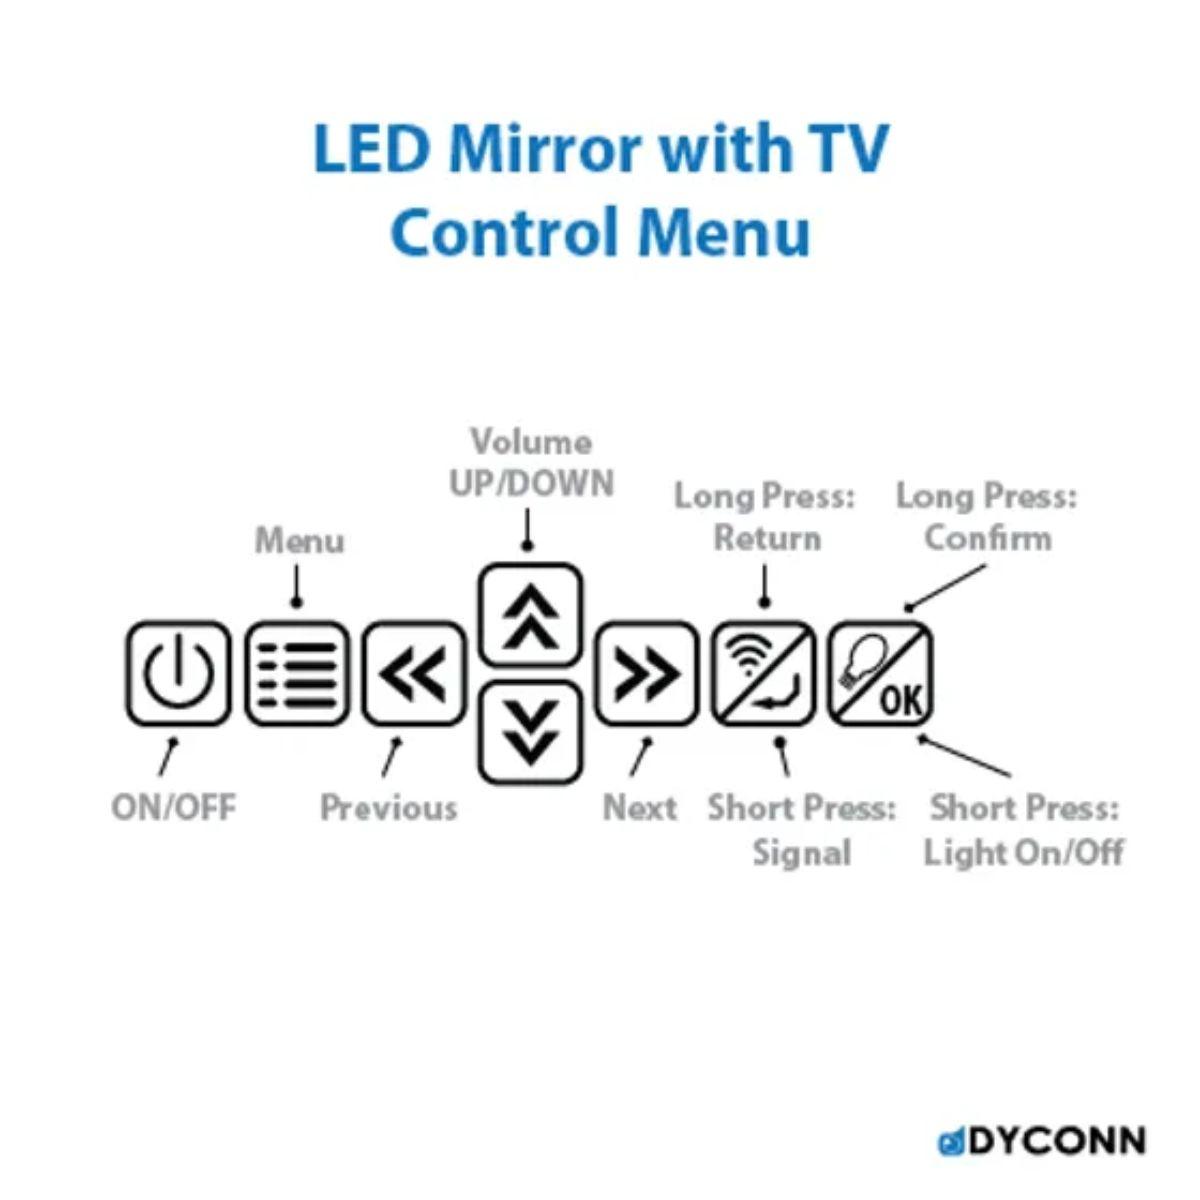 Edison Crystal 30 In. X 36 In. LED Wall Mirror With 13.3 in. LCD Television and Touch On/Off Dimmer Function